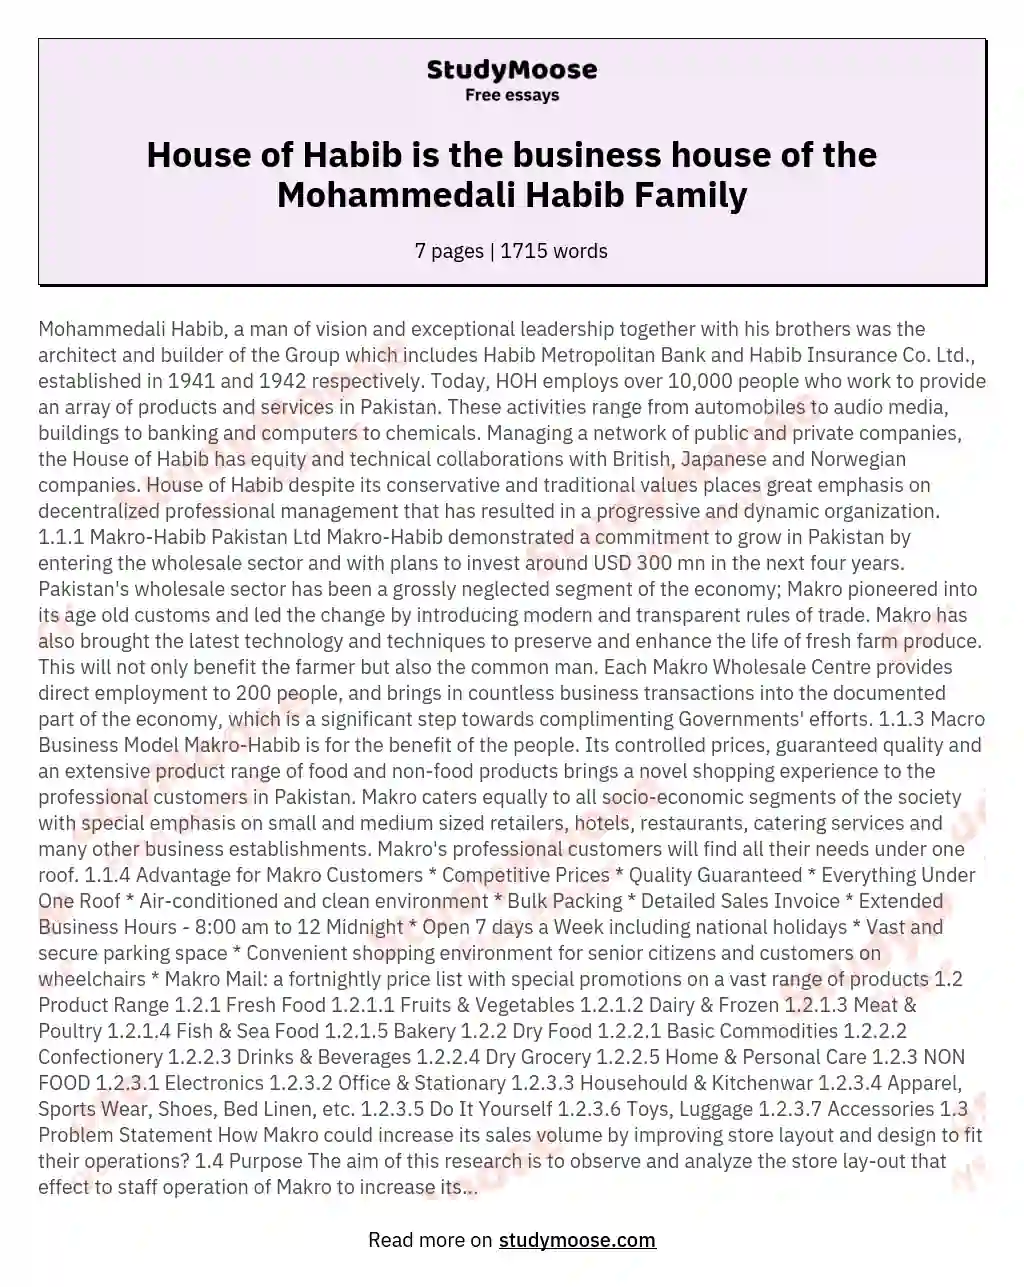 House of Habib is the business house of the Mohammedali Habib Family